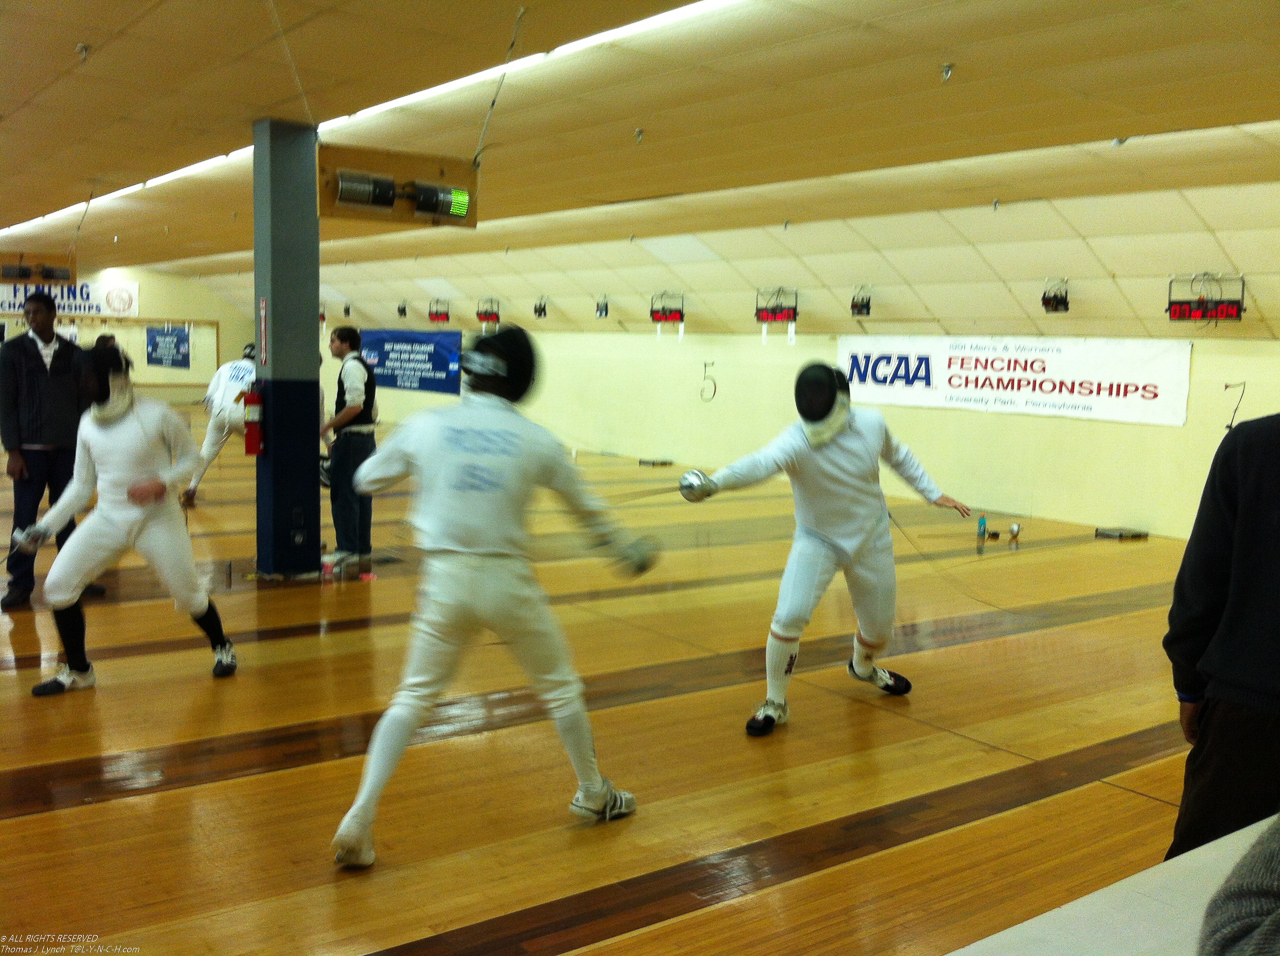 Dan at Fencing Tournement at our local club Mission Fencing.  ~~  made it through the pools and was up against a Ranked player to make the final 8 to get ranked.......next time, Danny!